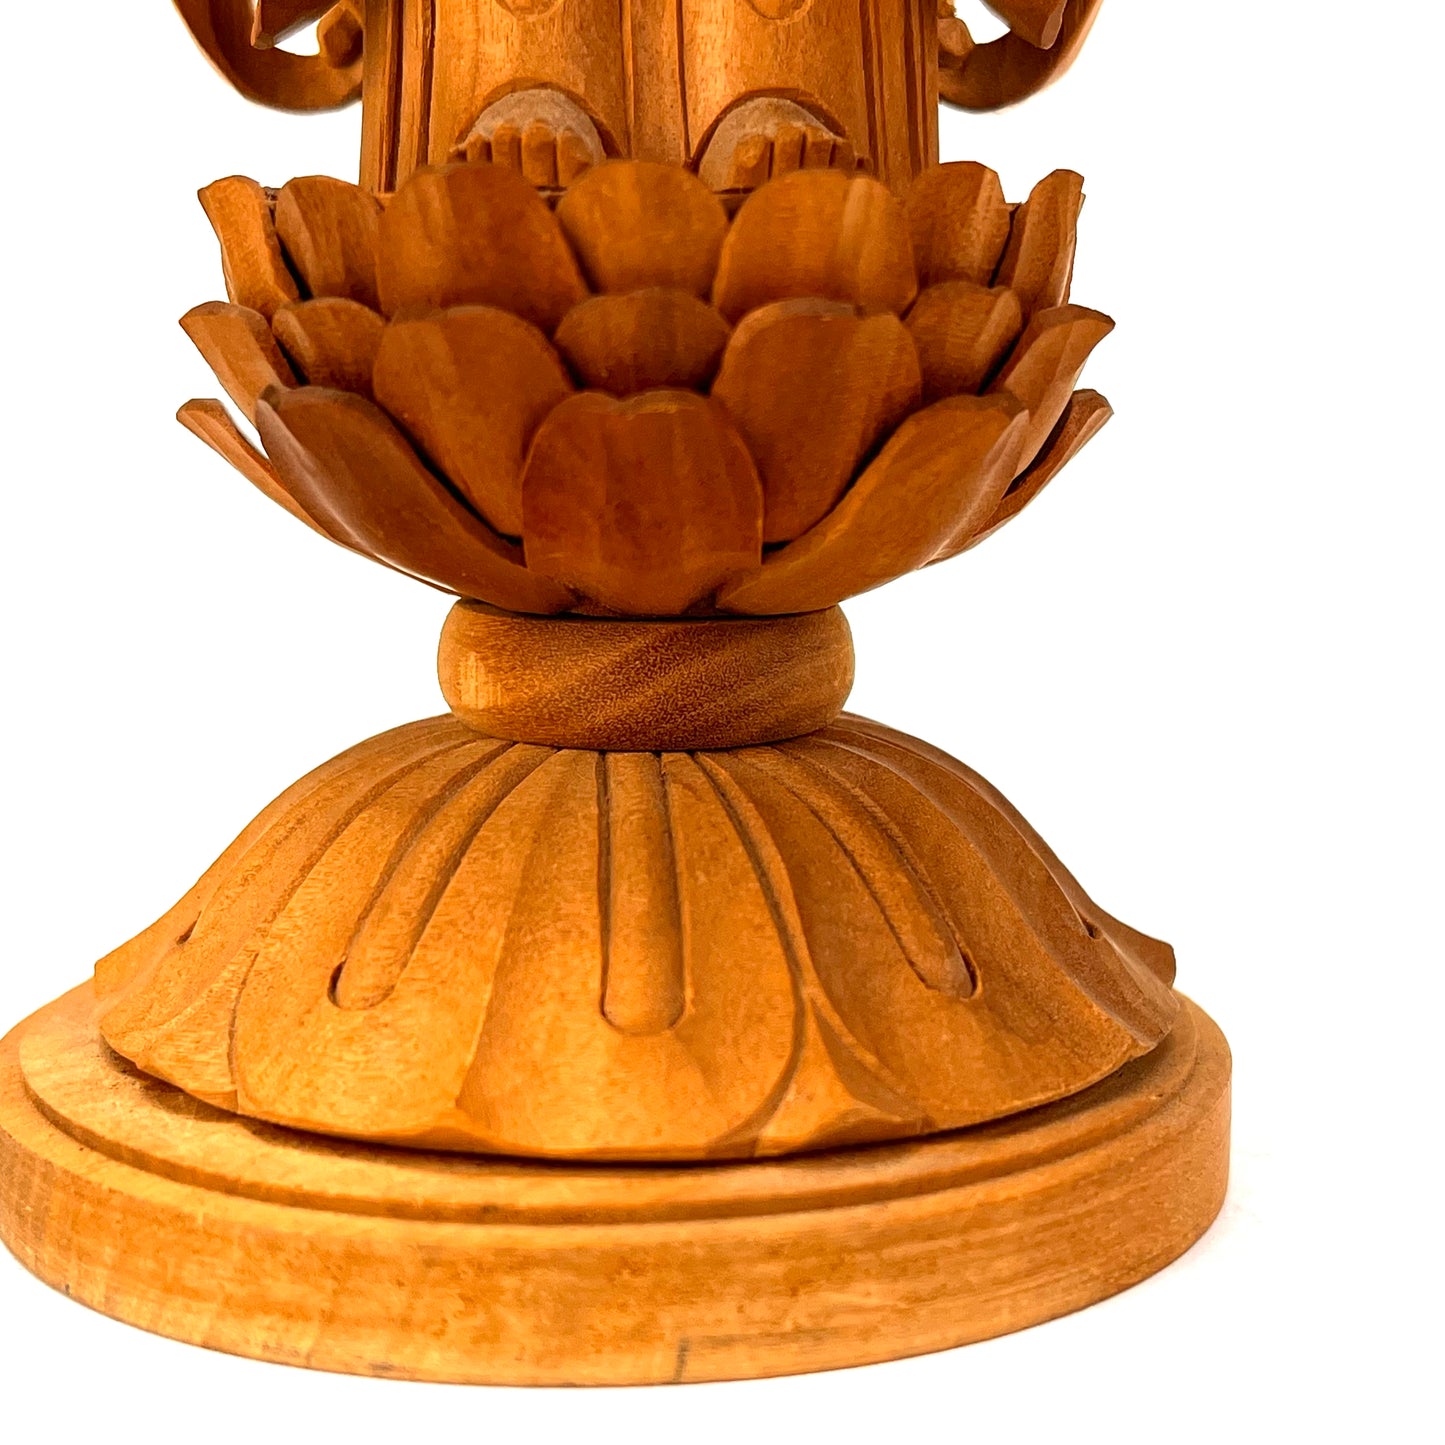 Statue of The Buddha in Standing Pose Carved Wooden Japanese lotus back